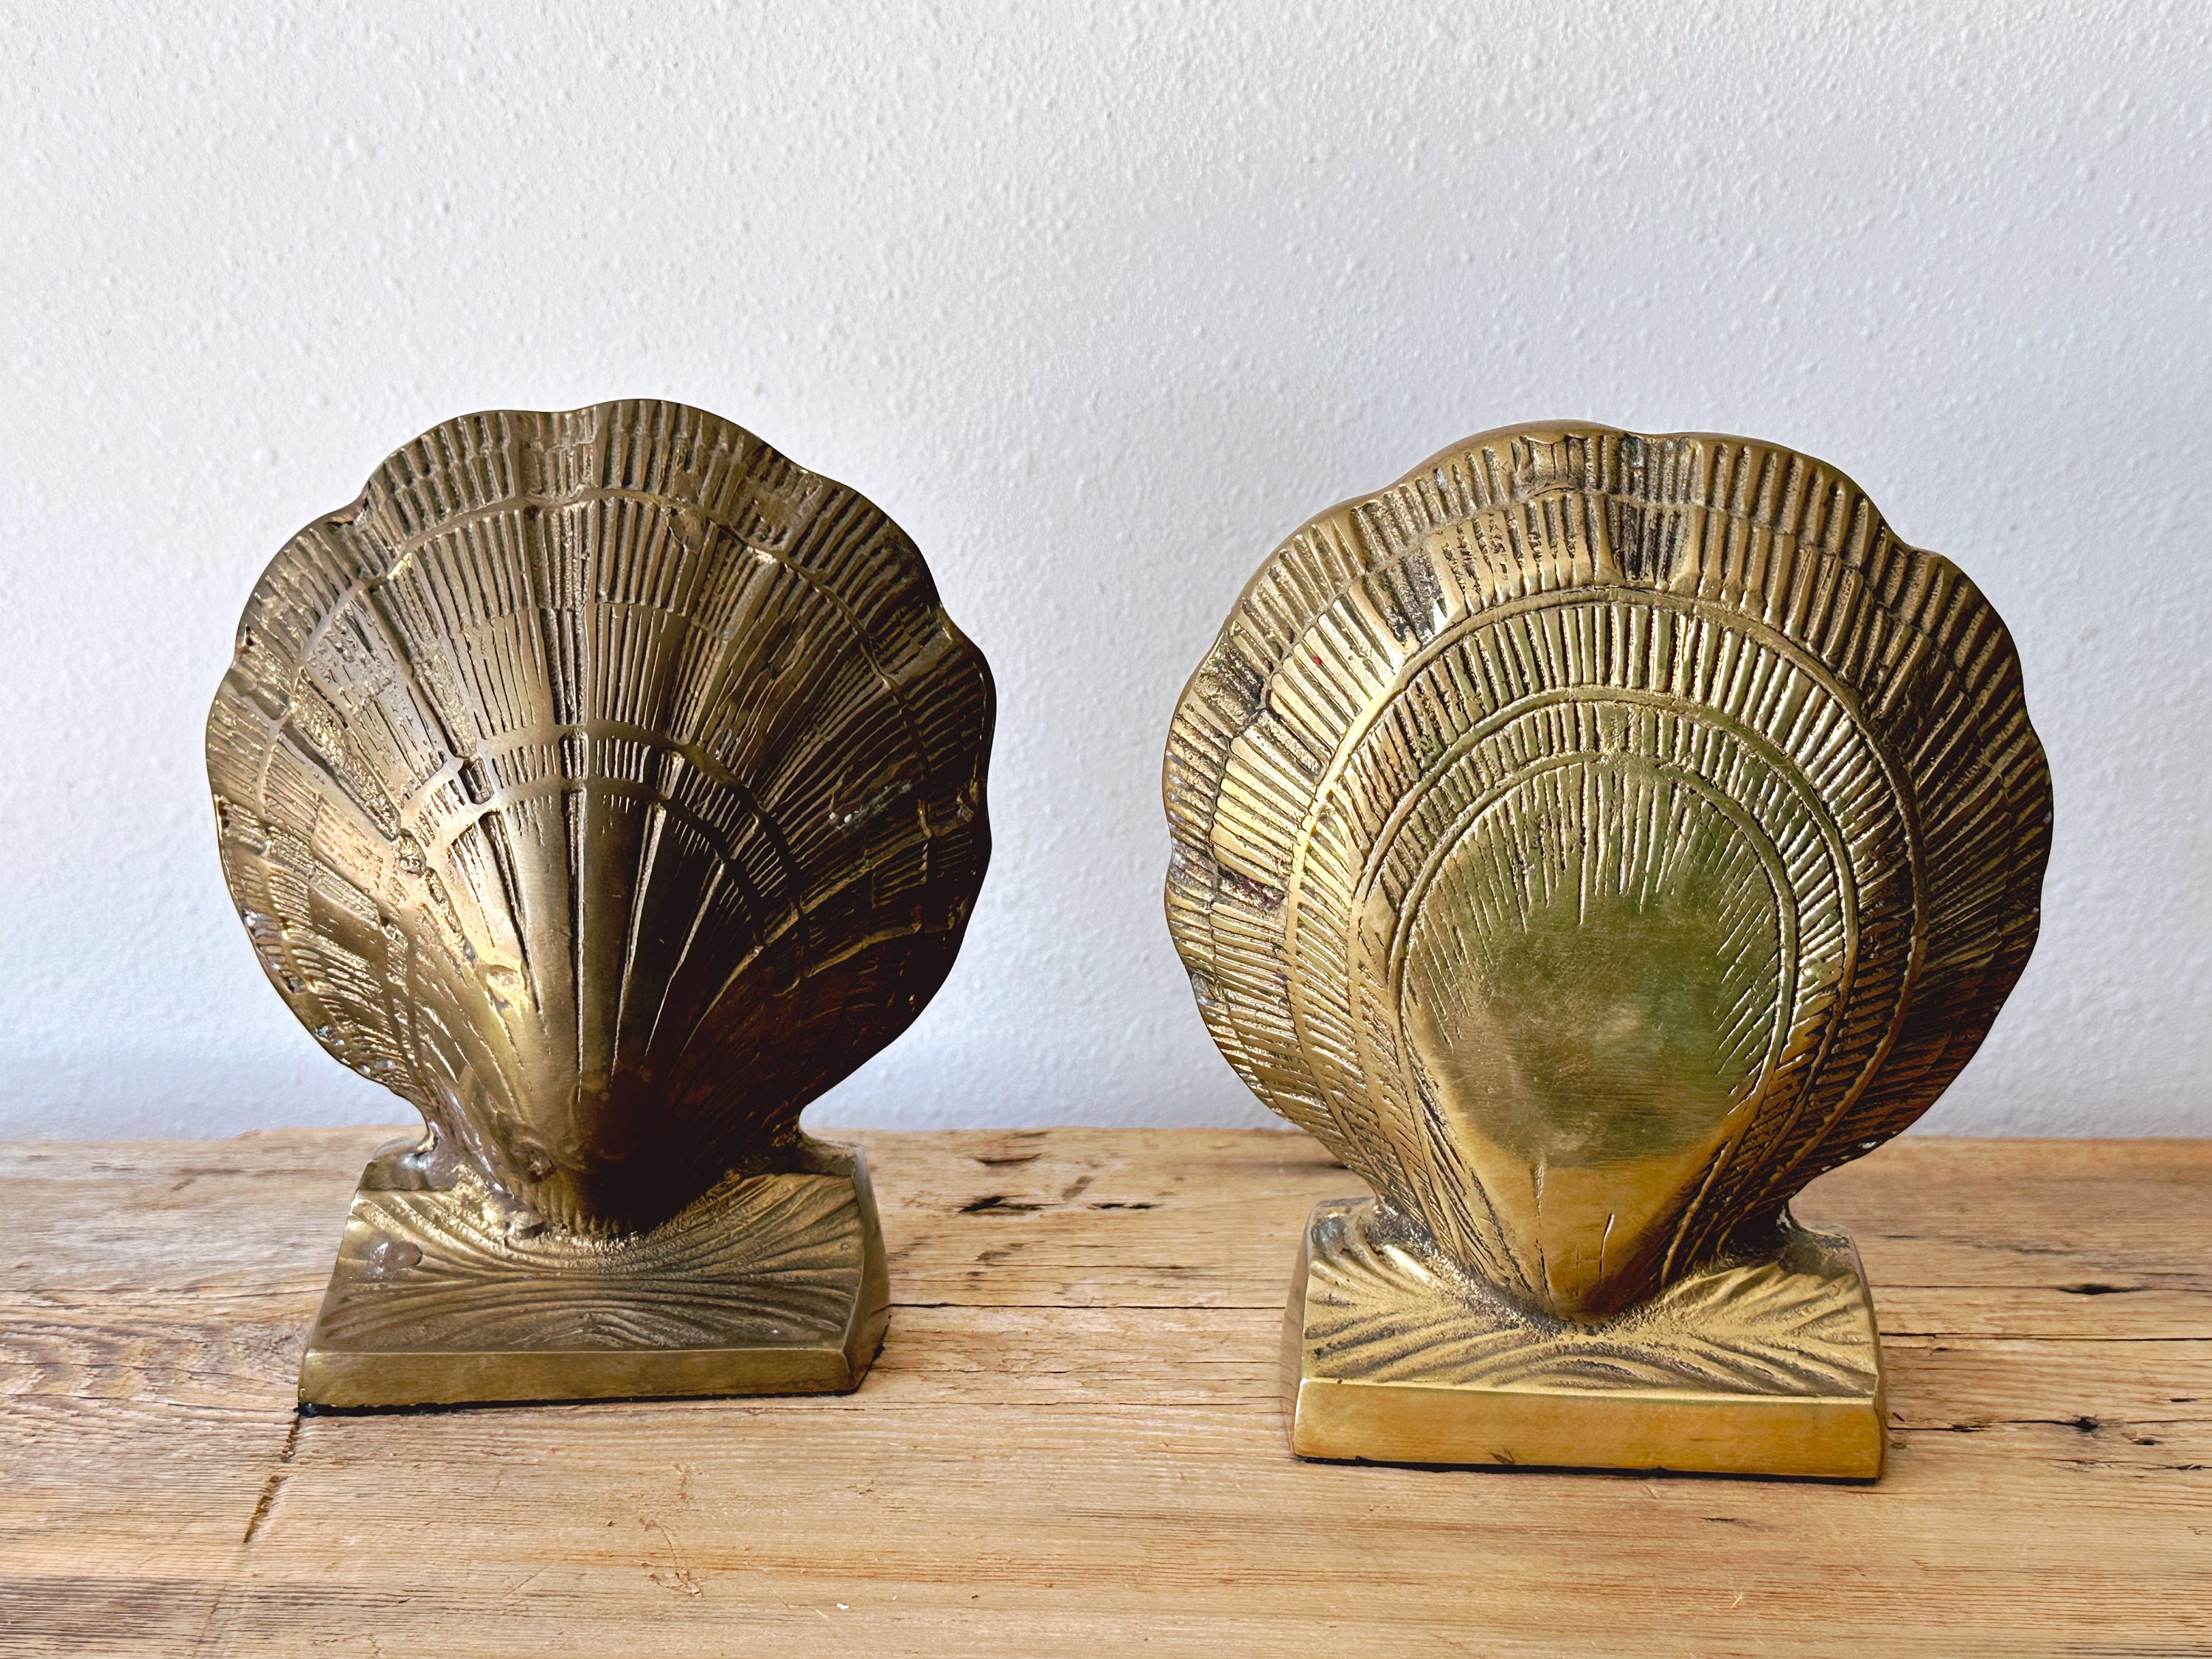 Pair of Vintage Brass Clam Shell Bookends Hollywood Regency Scallop  Seashell Nautical Decor Bookshelf Decor Gift for Book Lovers 